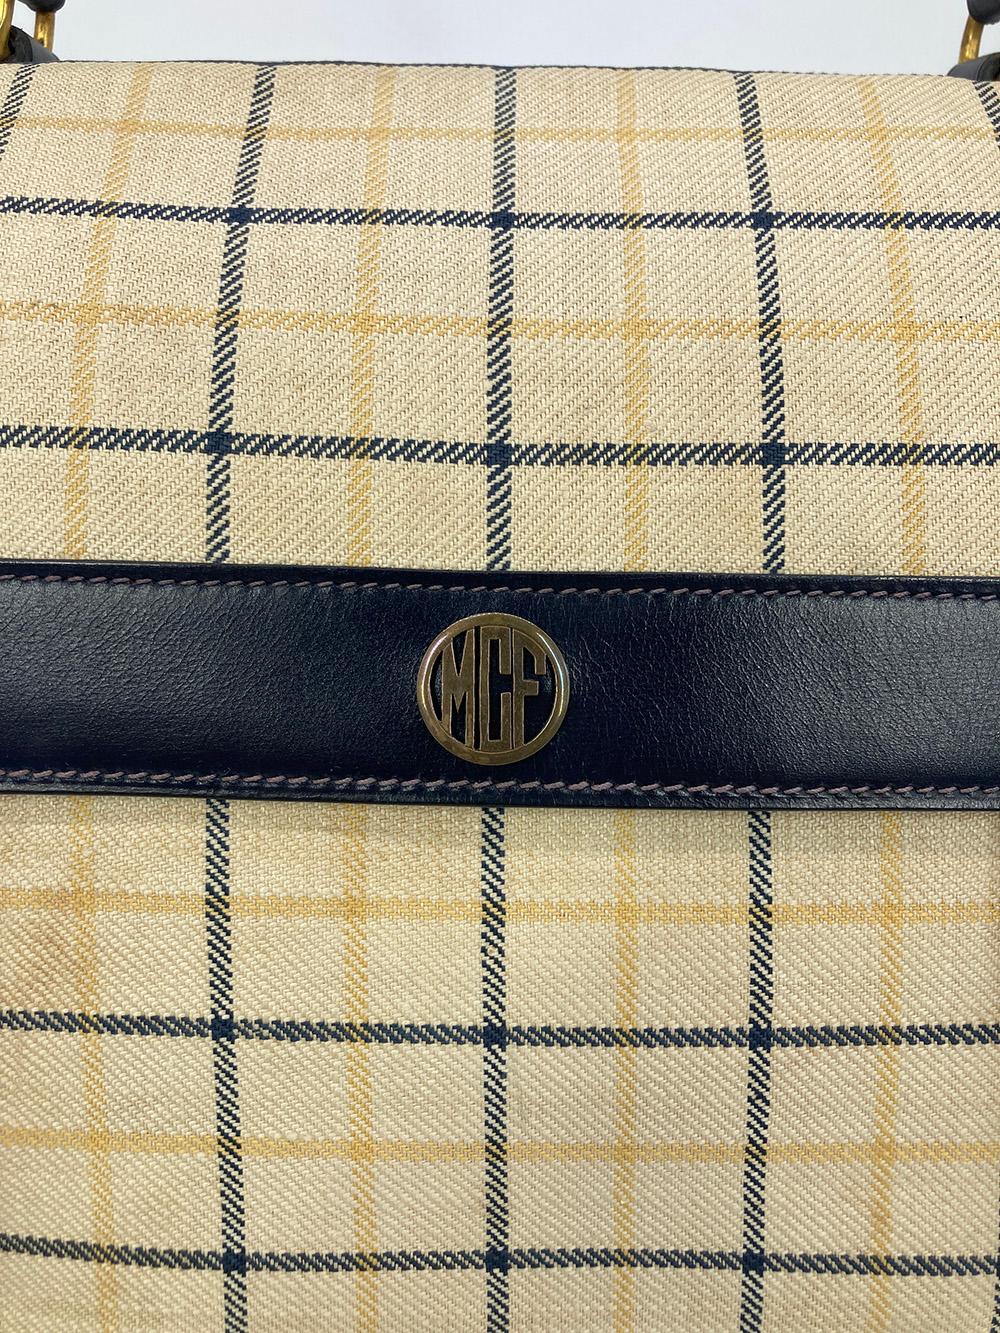 Vintage Hermes Plaid Canvas and Navy Leather Briefcase Tote in fair condition. Navy box calf leather with beige navy and yellow plaid canvas and gold hardware. Removable navy leather shoulder strap. Top handle and double buckle front closure opens